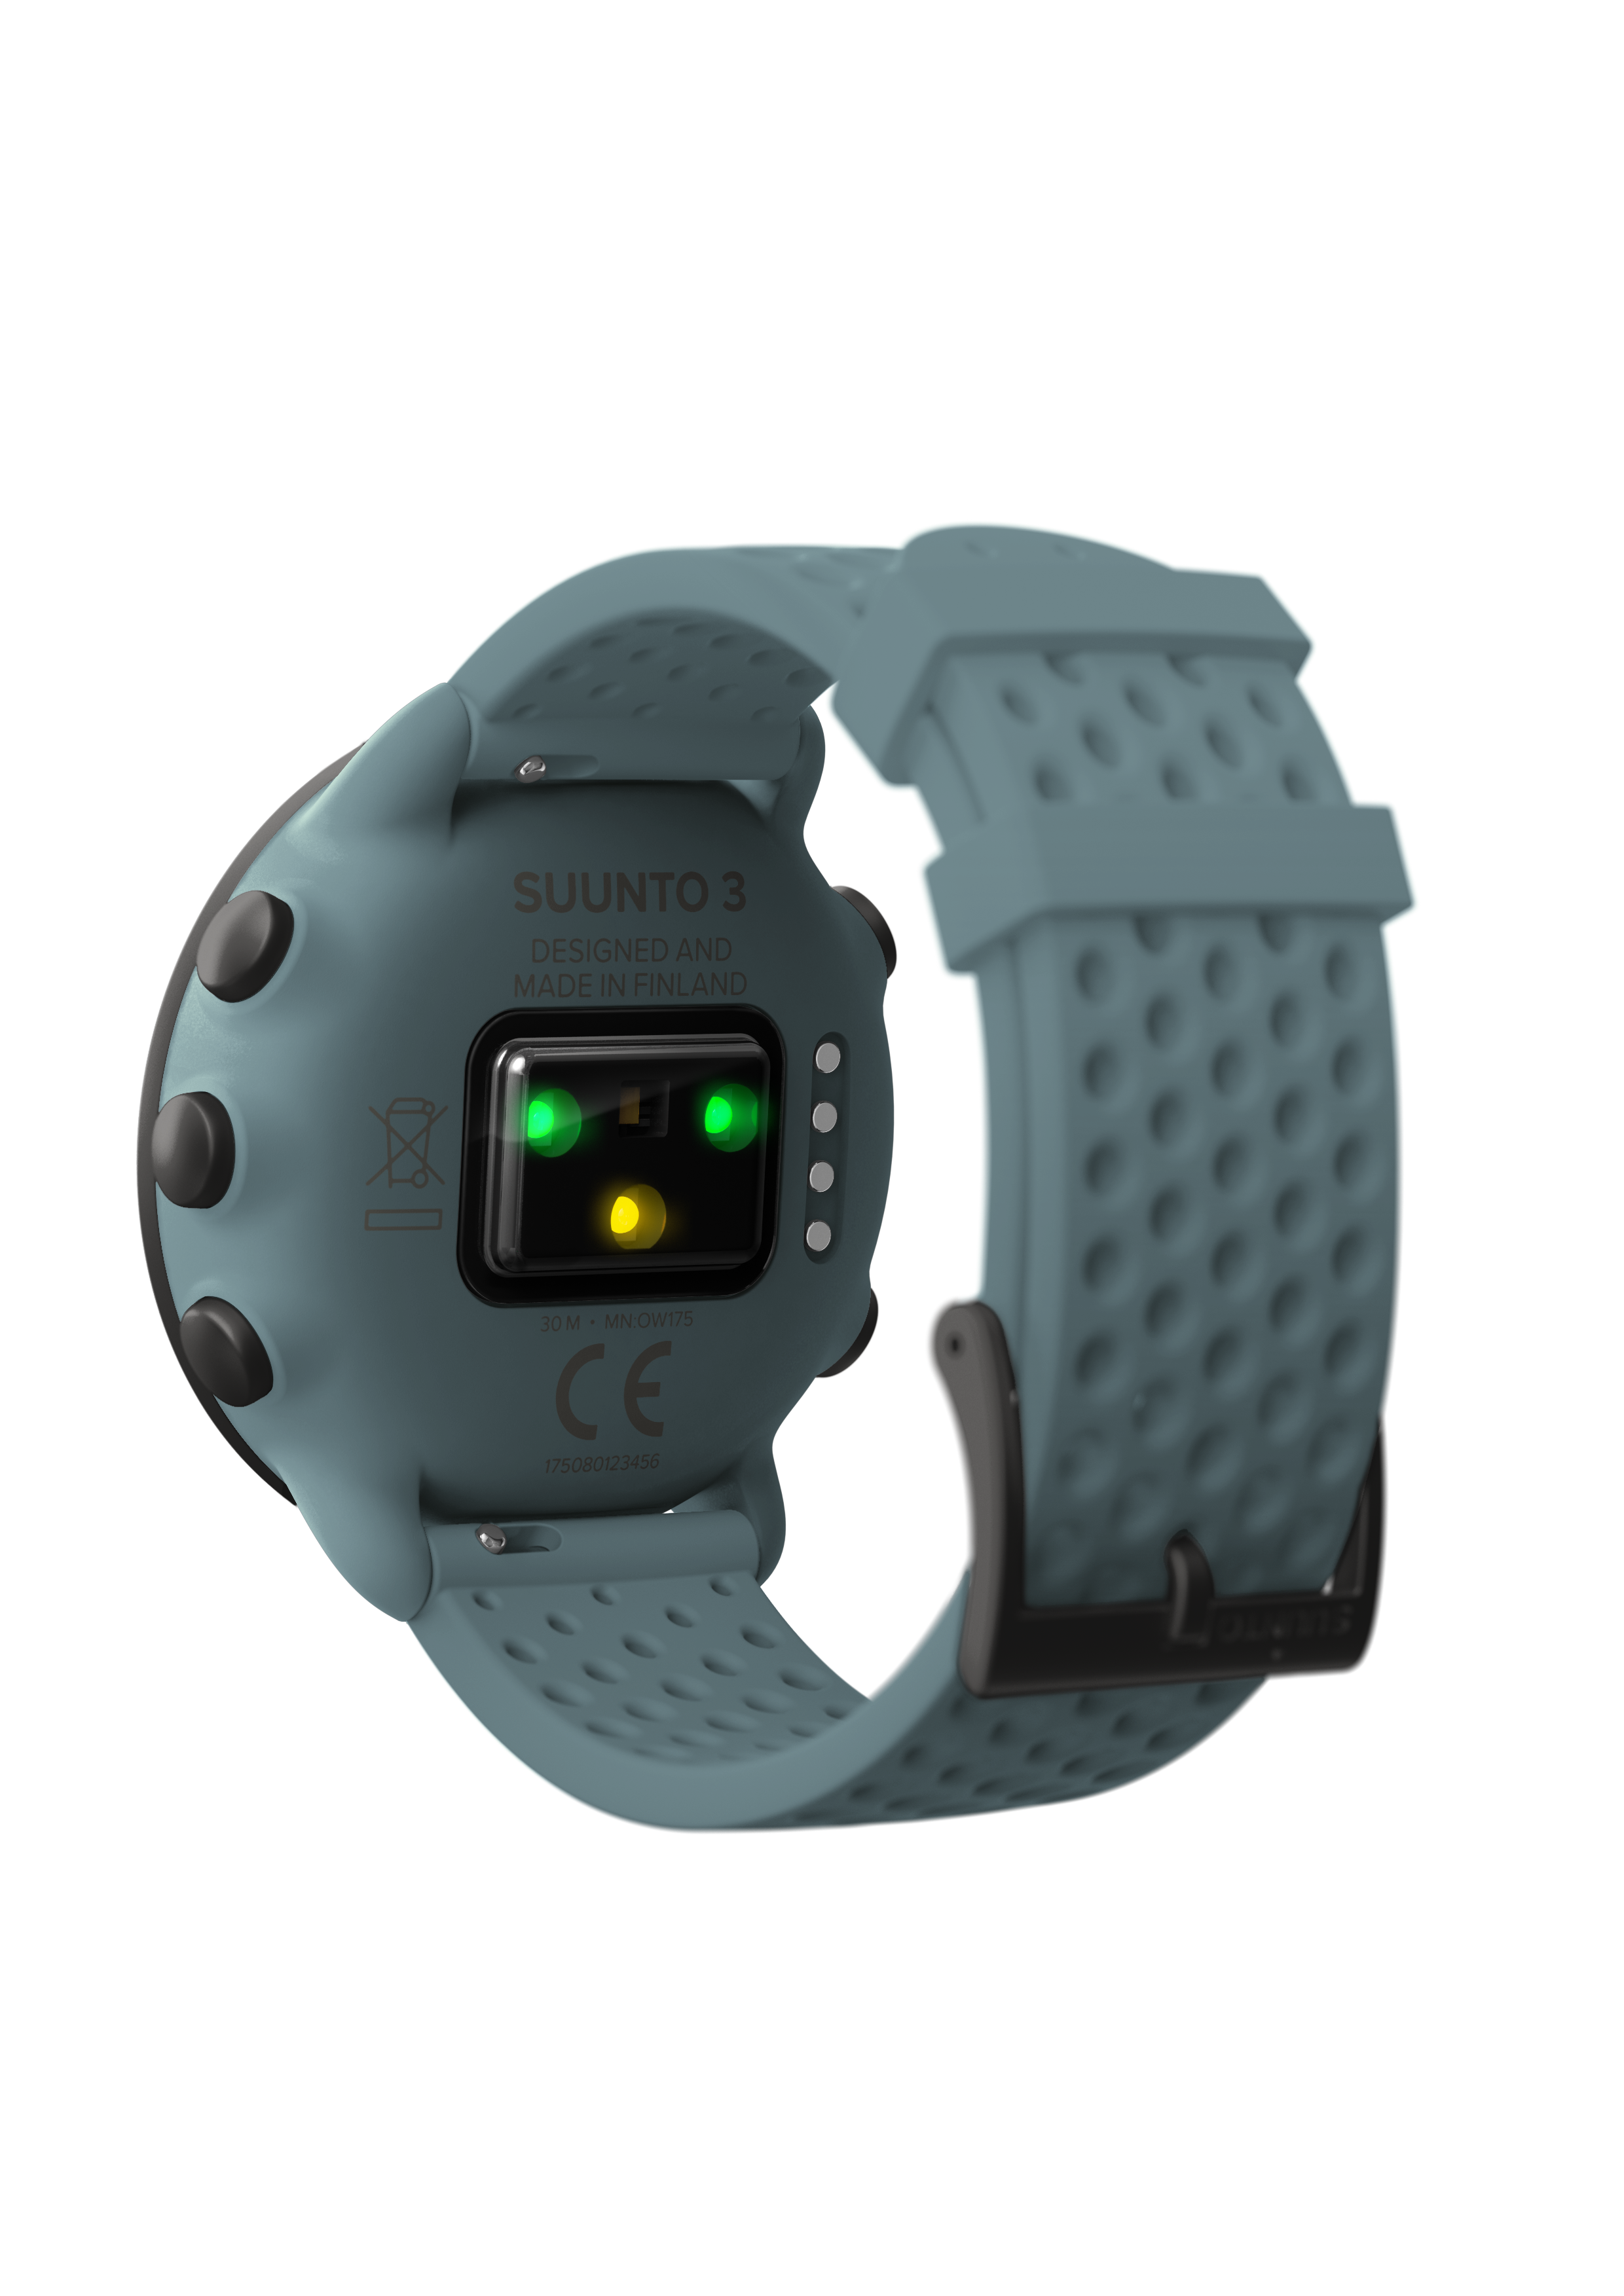 SS050474000 - SUUNTO 3 MOSS GREY - Rear Perspective View.png